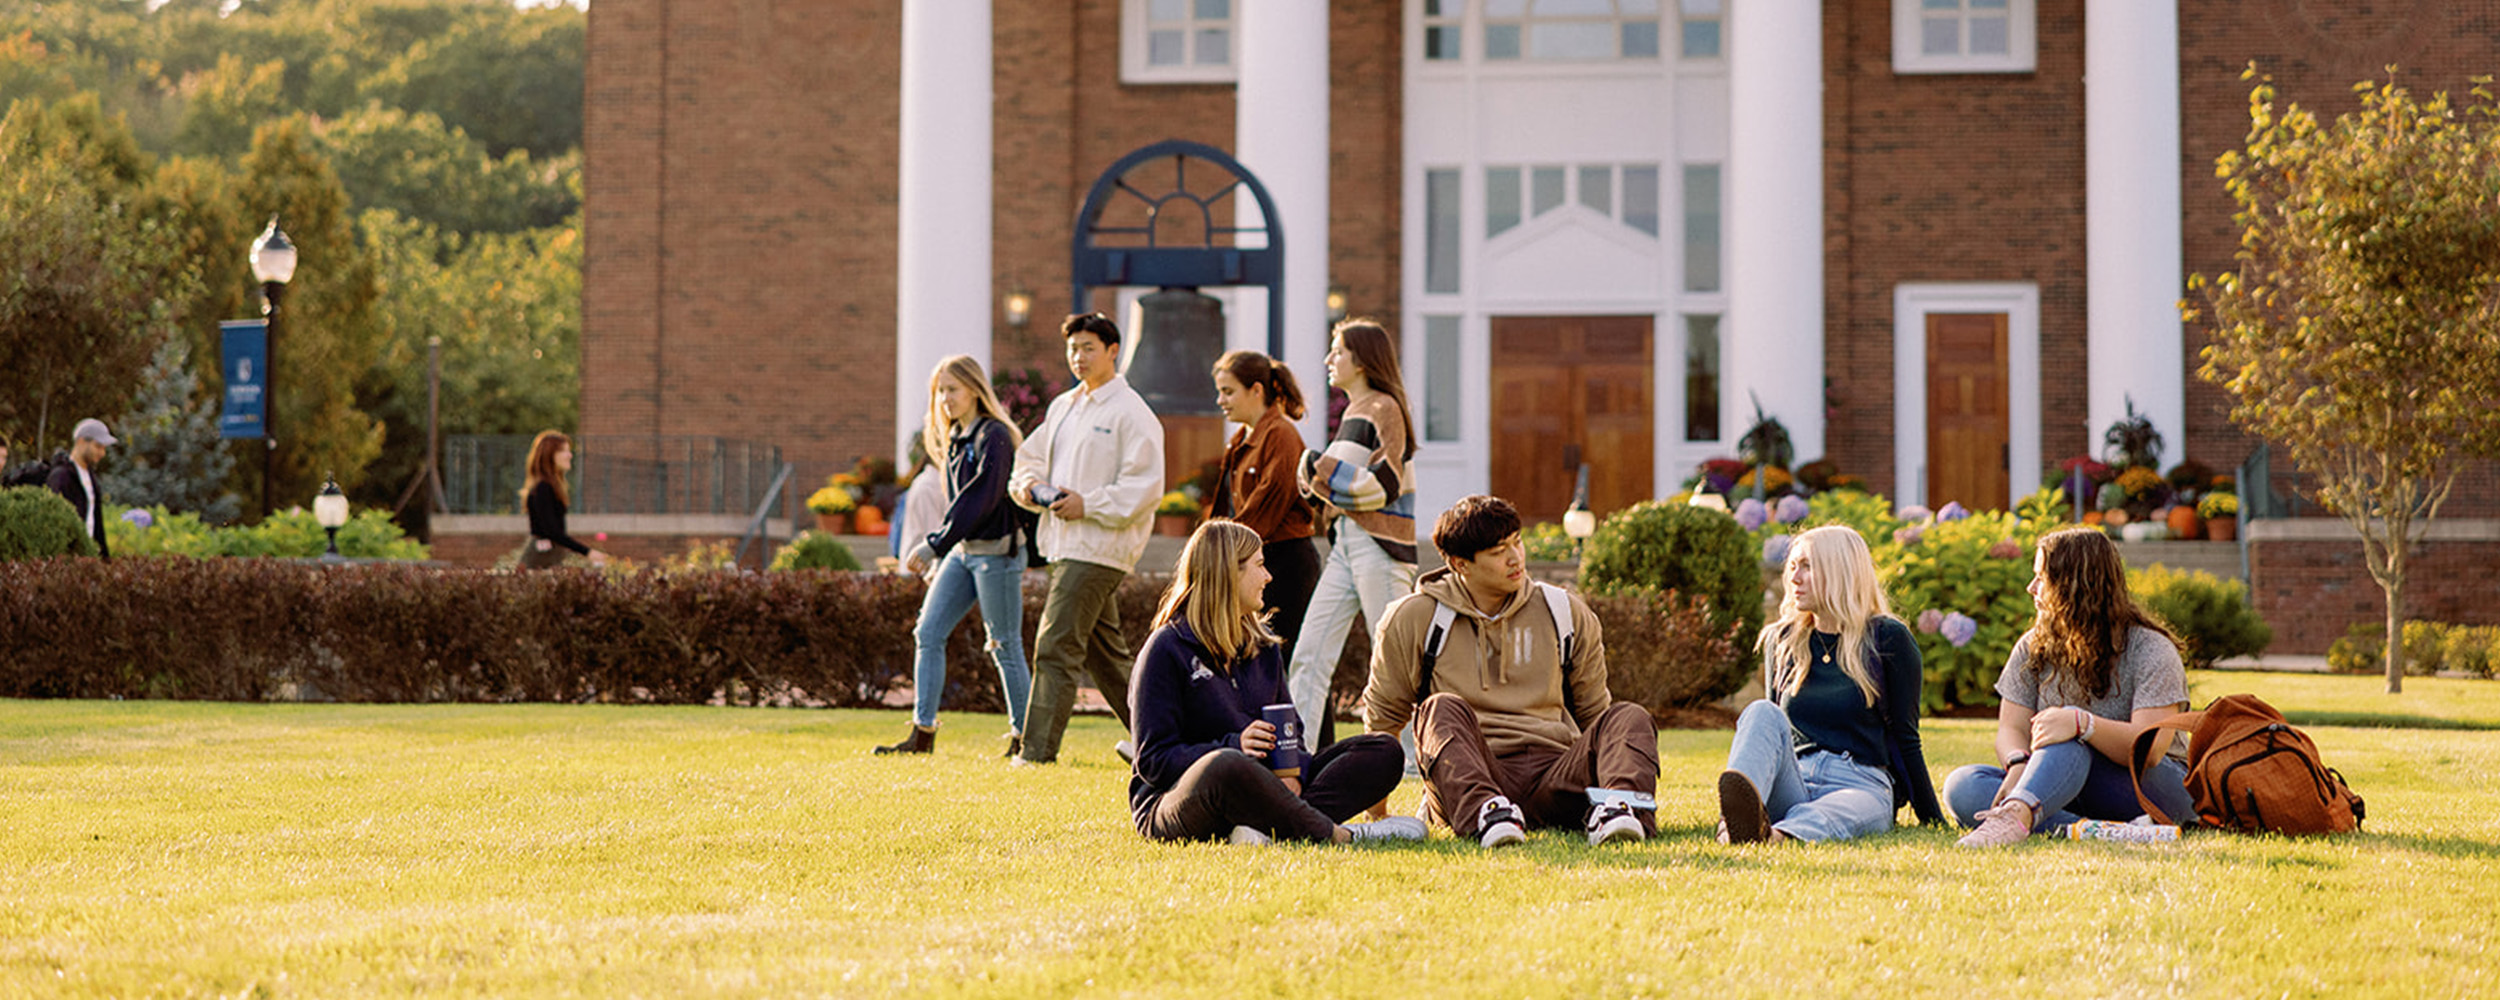 students talking on the grass